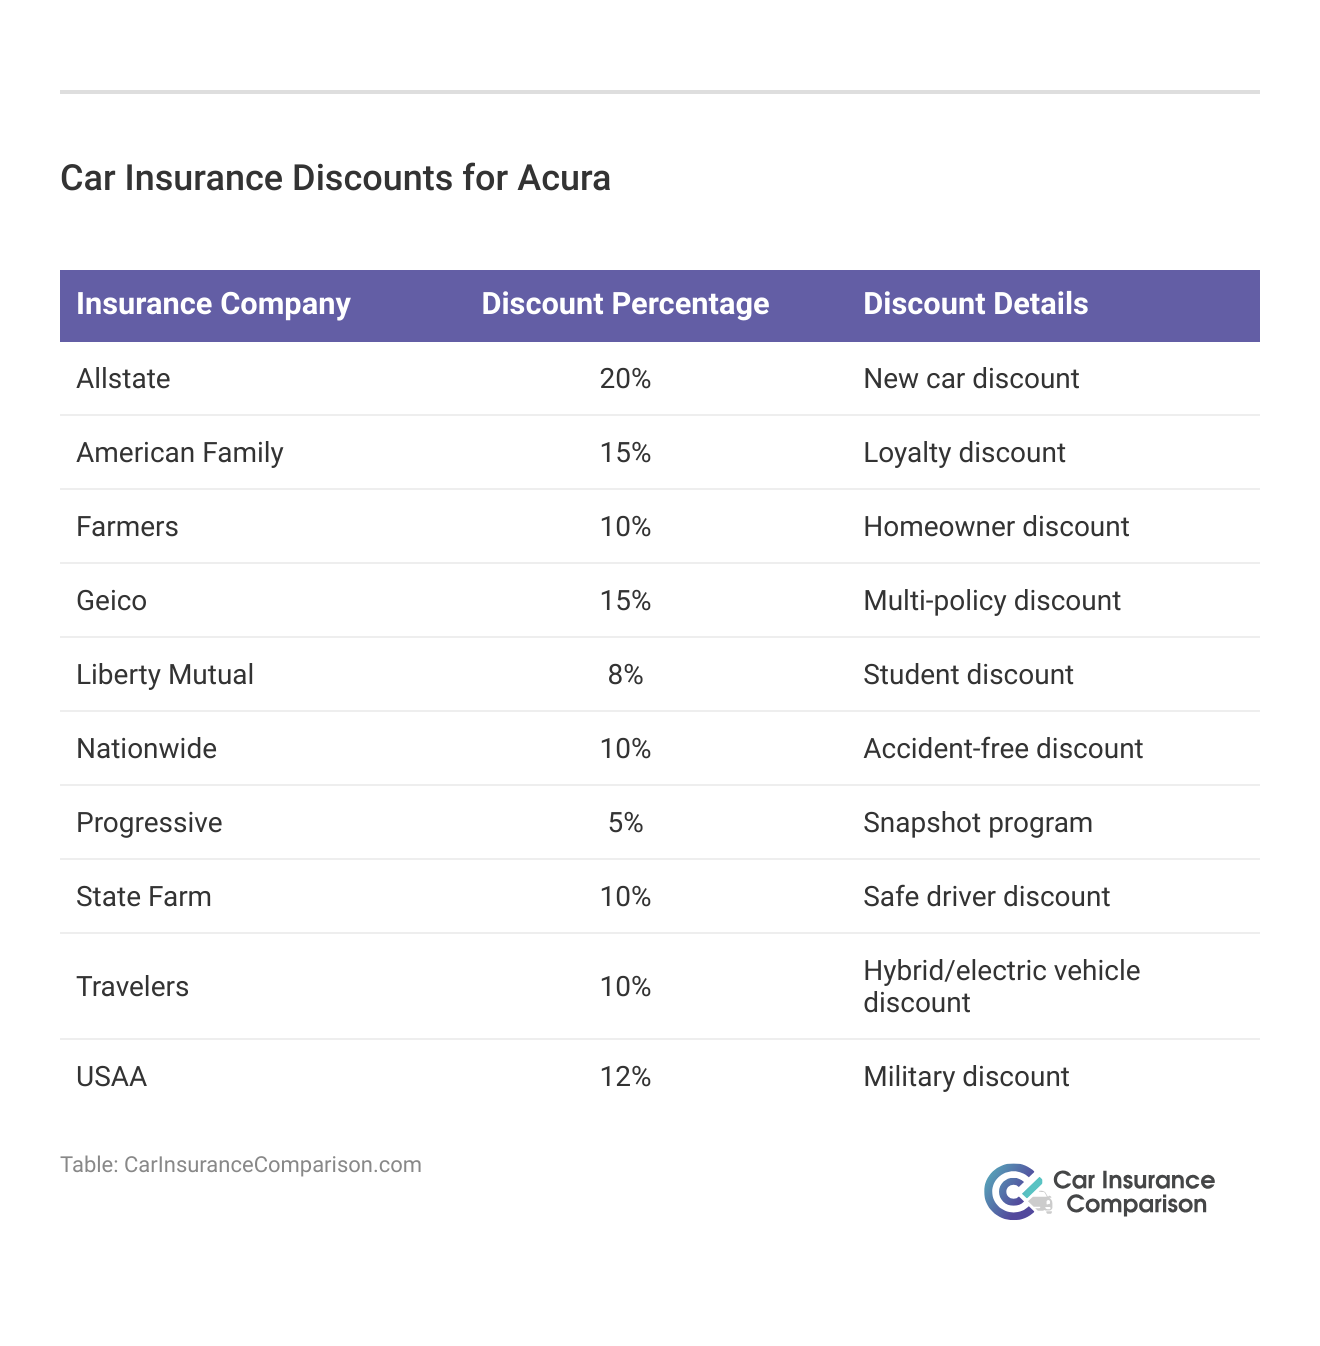 <h3>Car Insurance Discounts for Acura</h3>